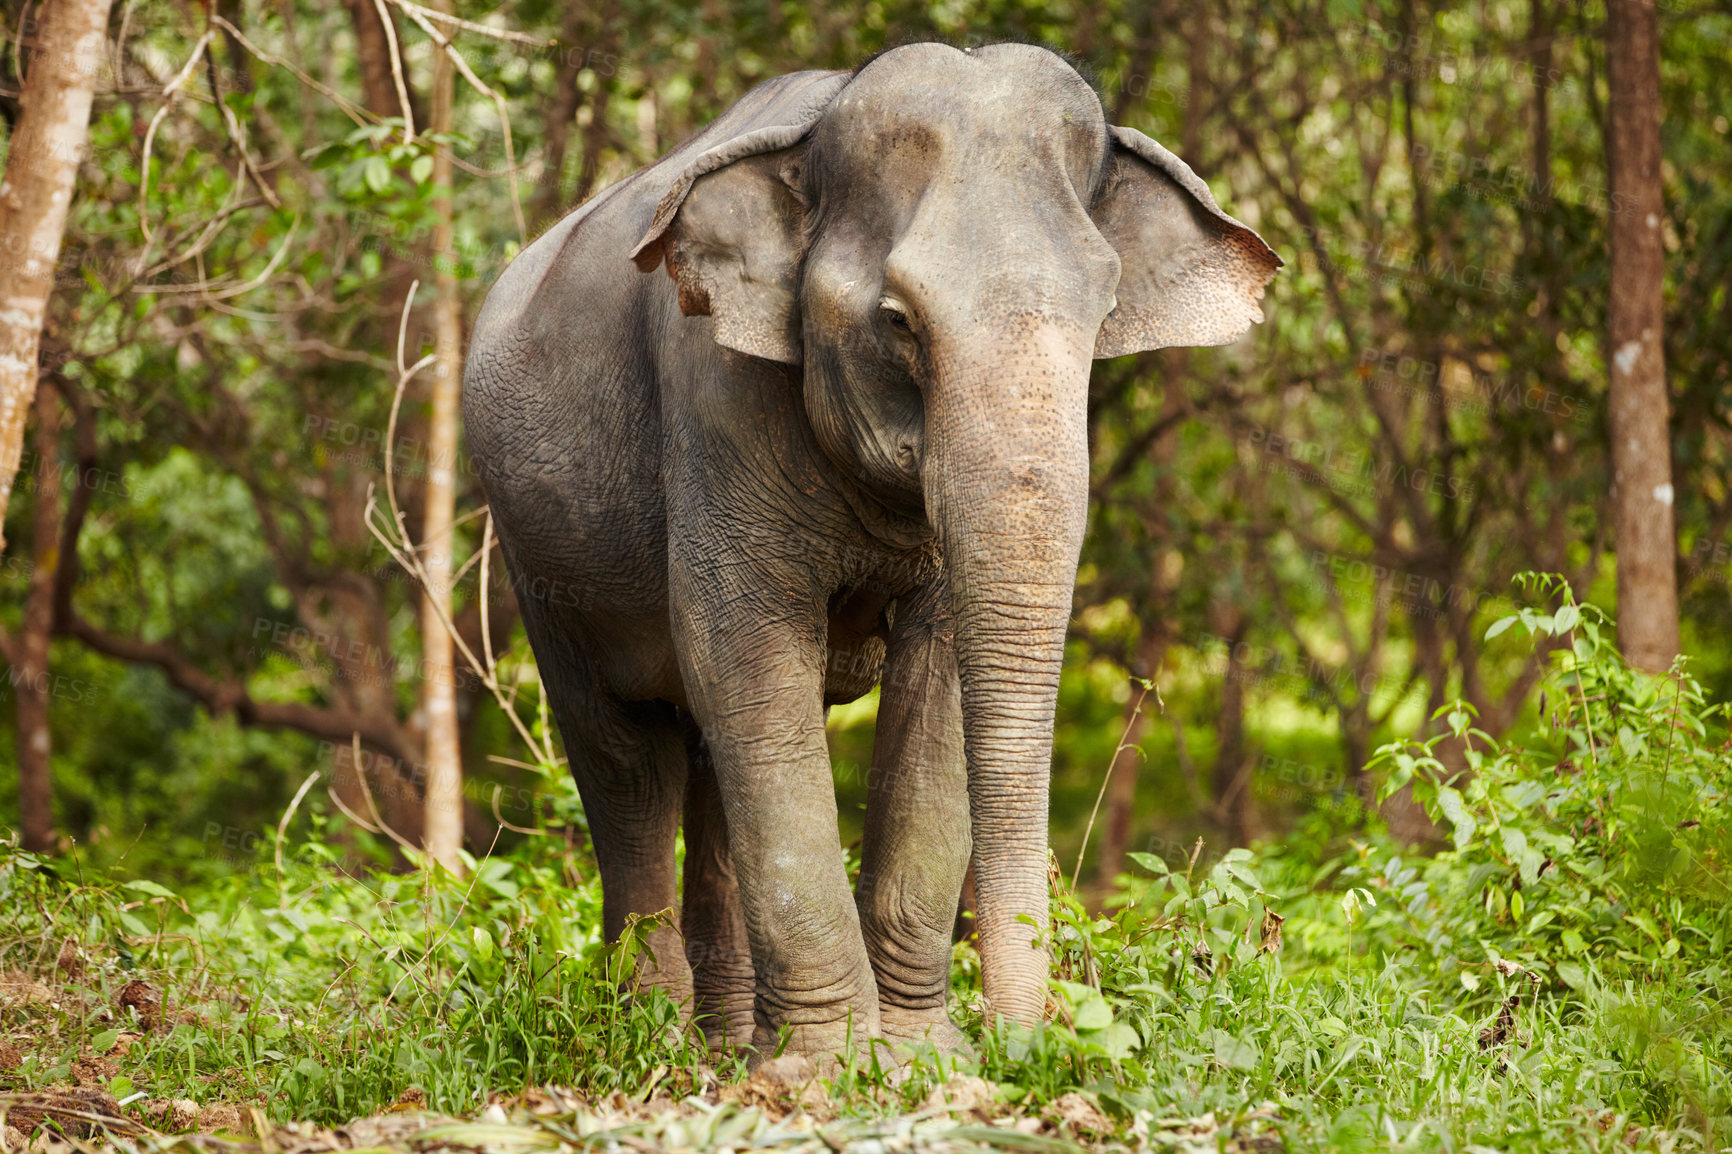 Buy stock photo Full-length image of an Asian elephant standing in the forest